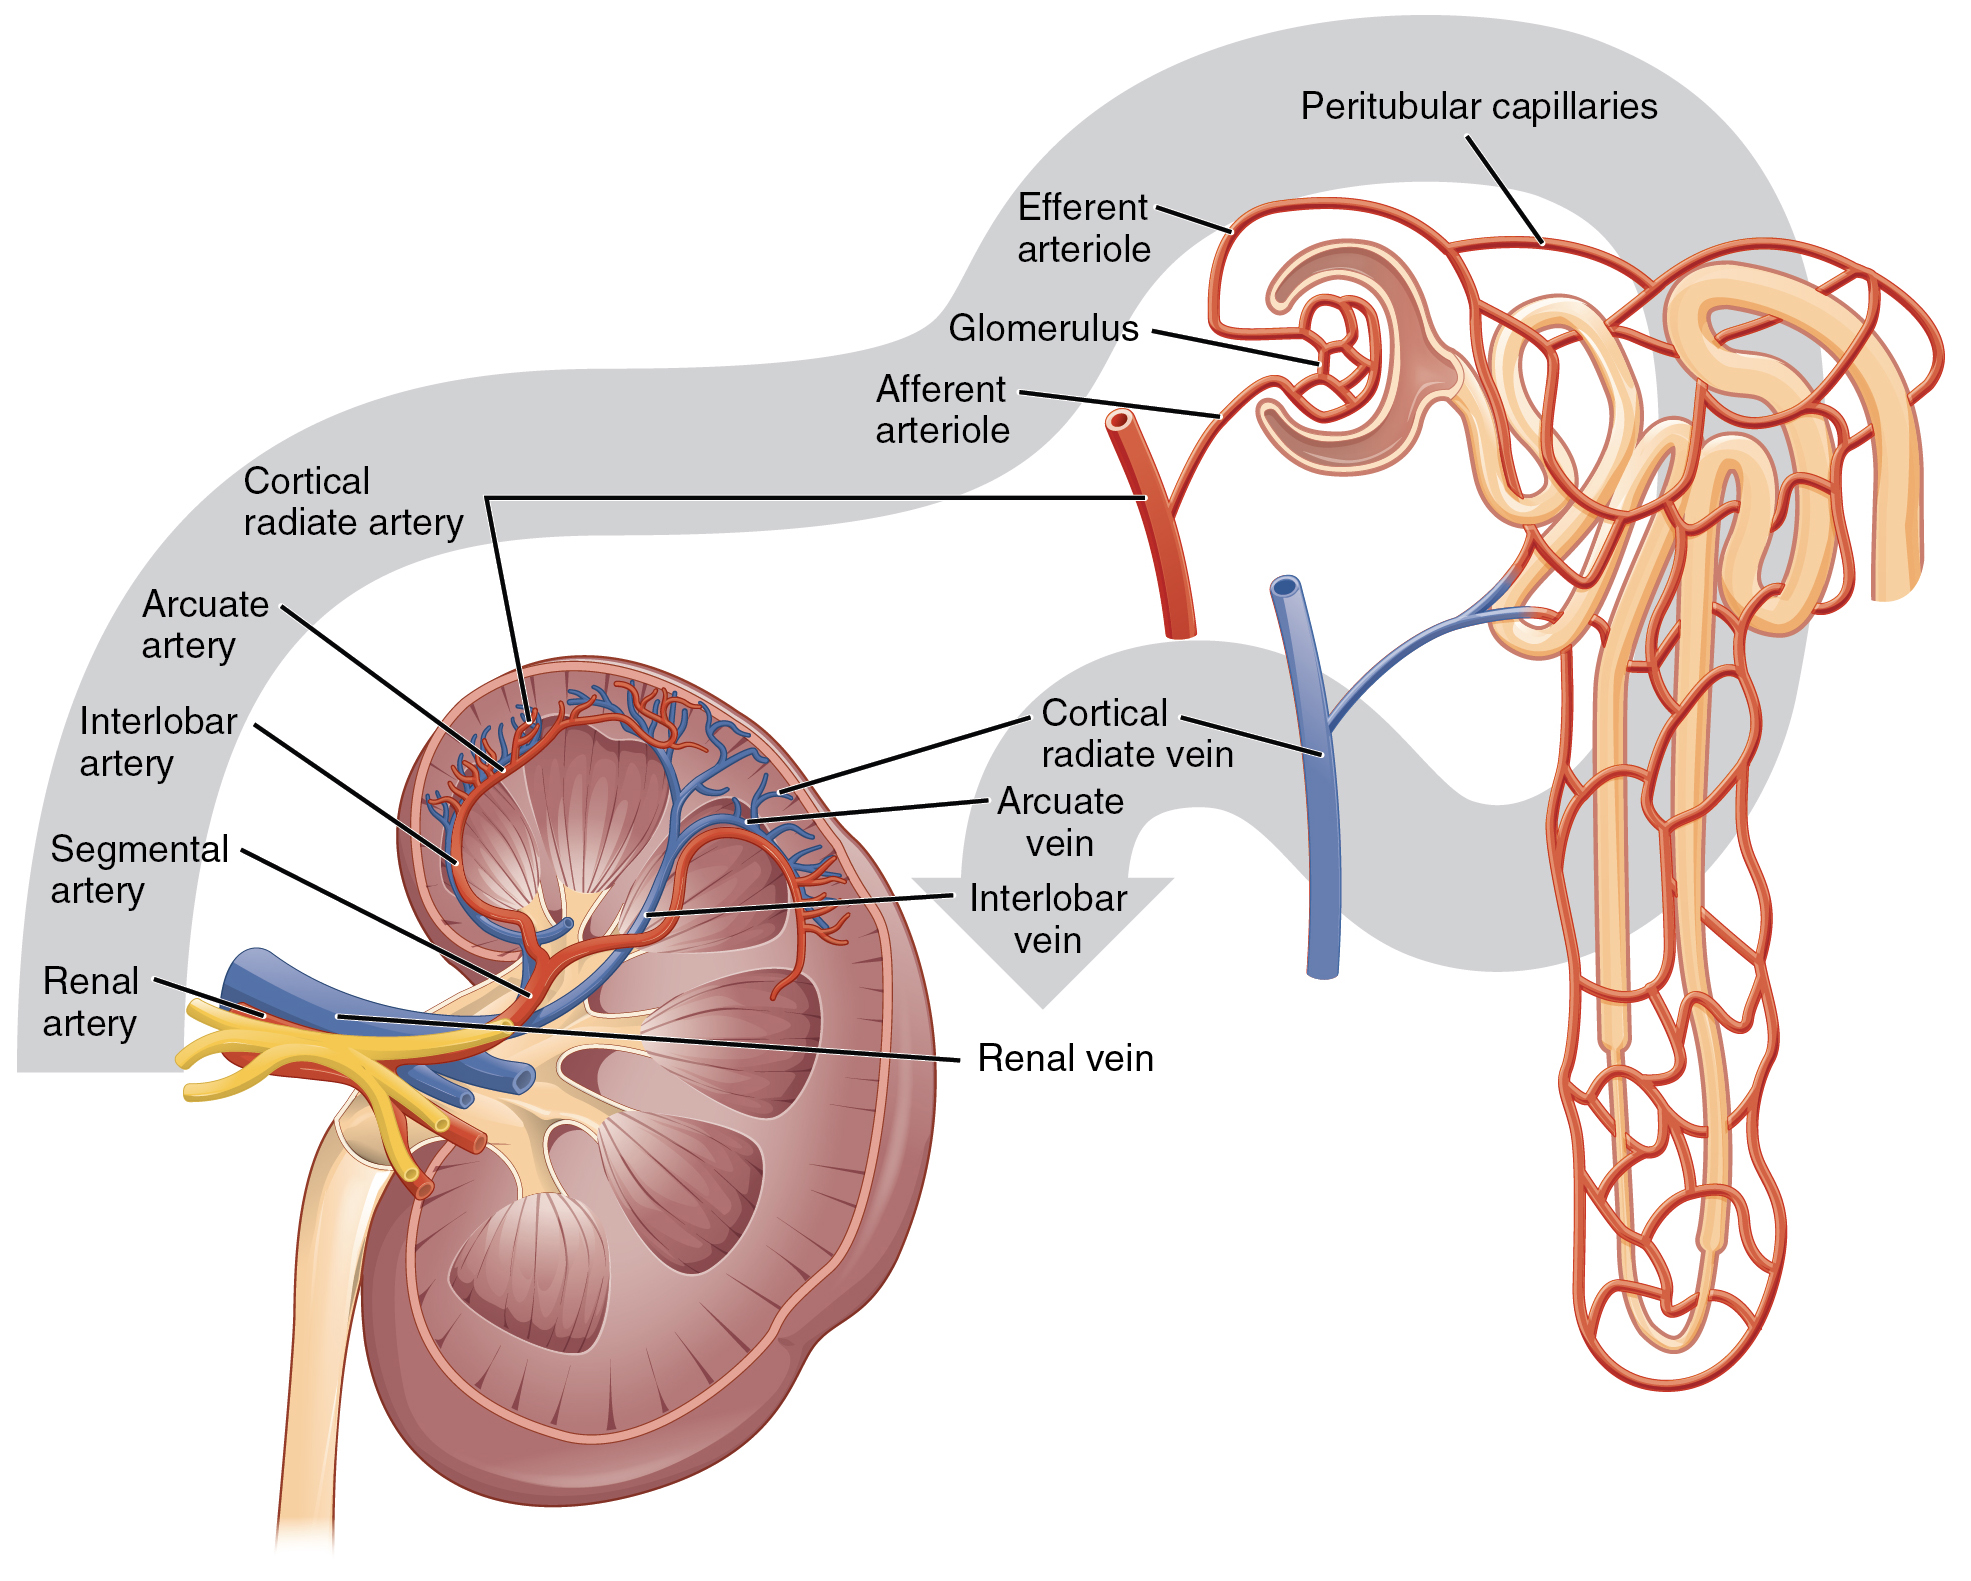 Illustration, with labels, showing blood flow through the kidney and nephrons.